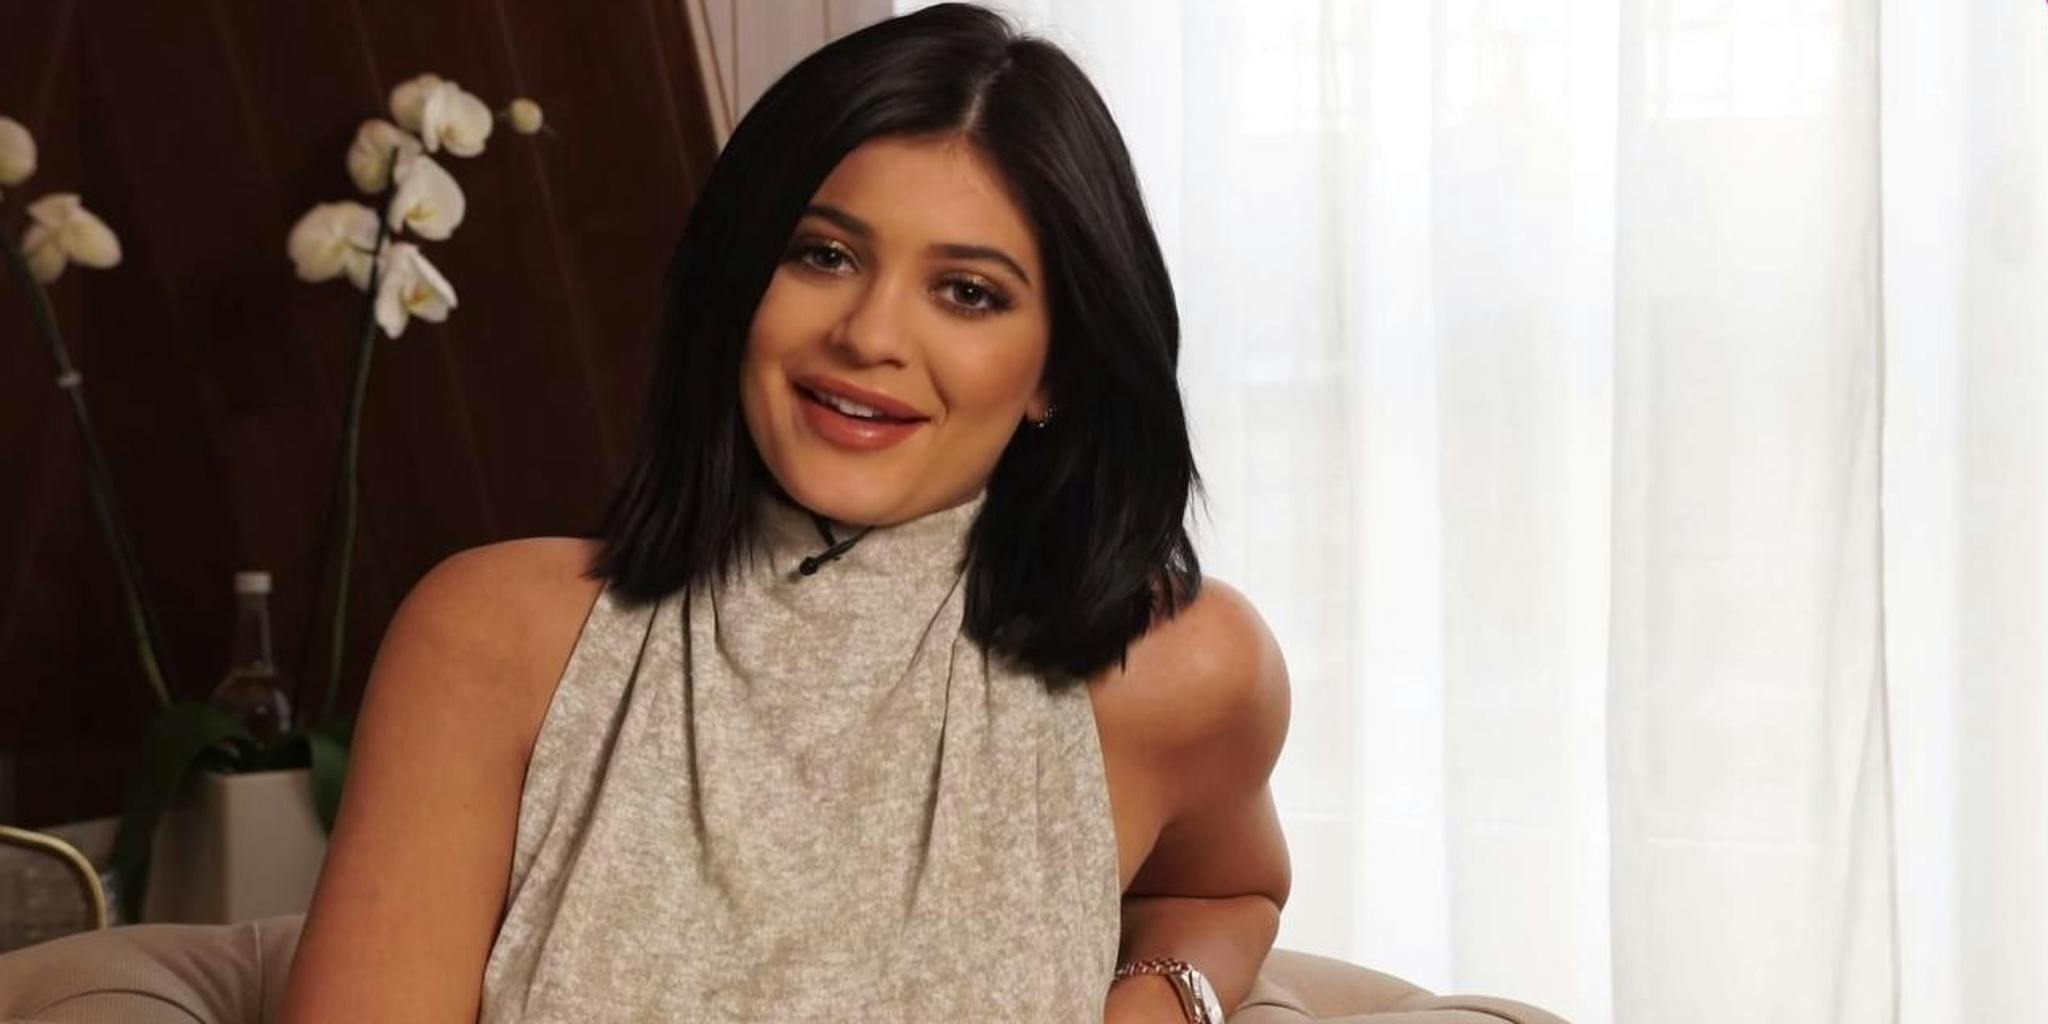 Kylie Jenner gropes older sister Kendall in salacious Snapchat story